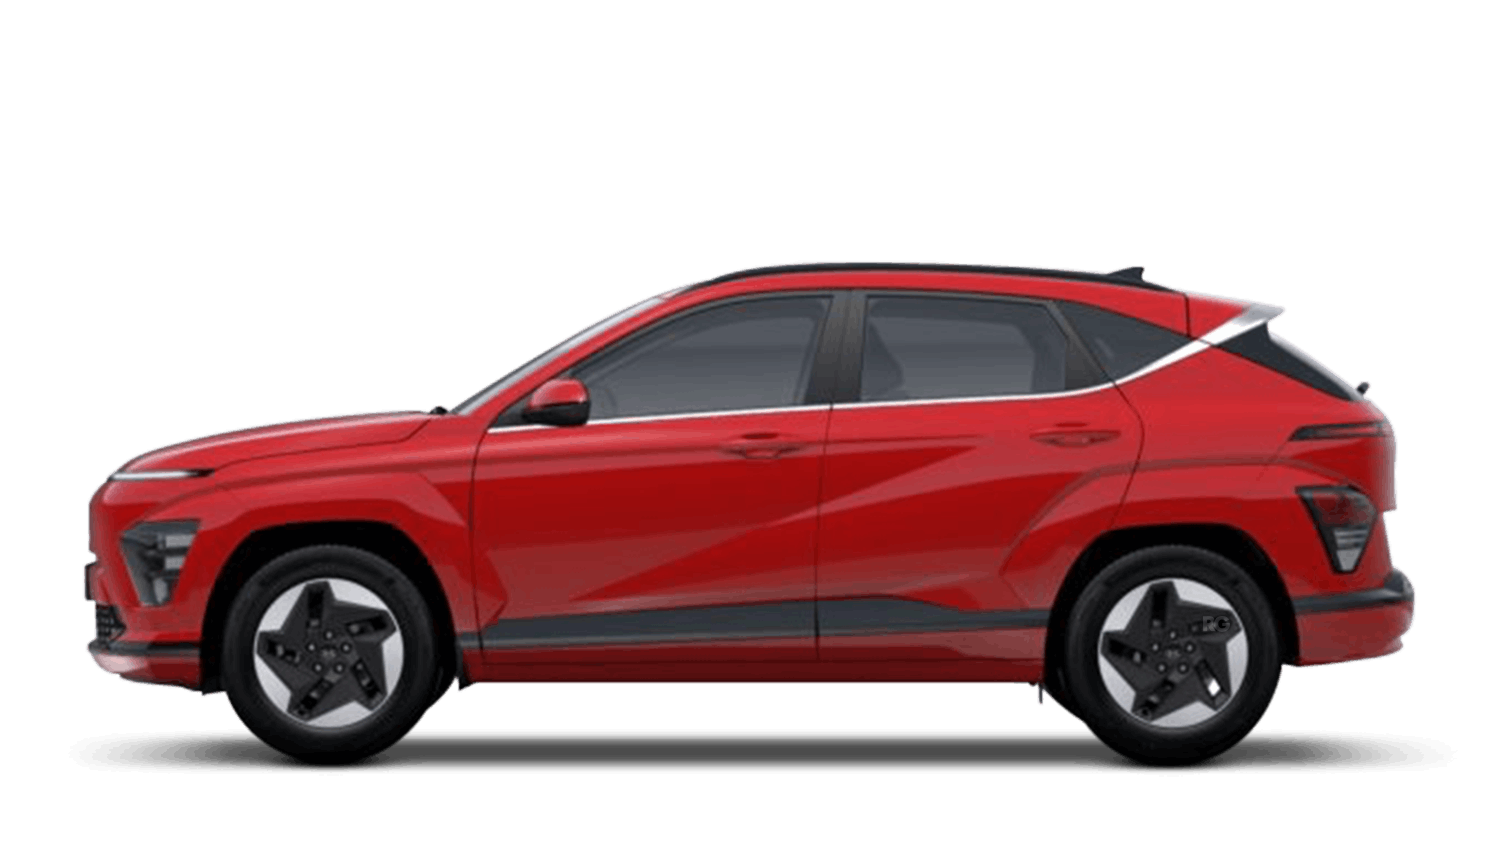 All-new KONA Electric Business Contract Hire